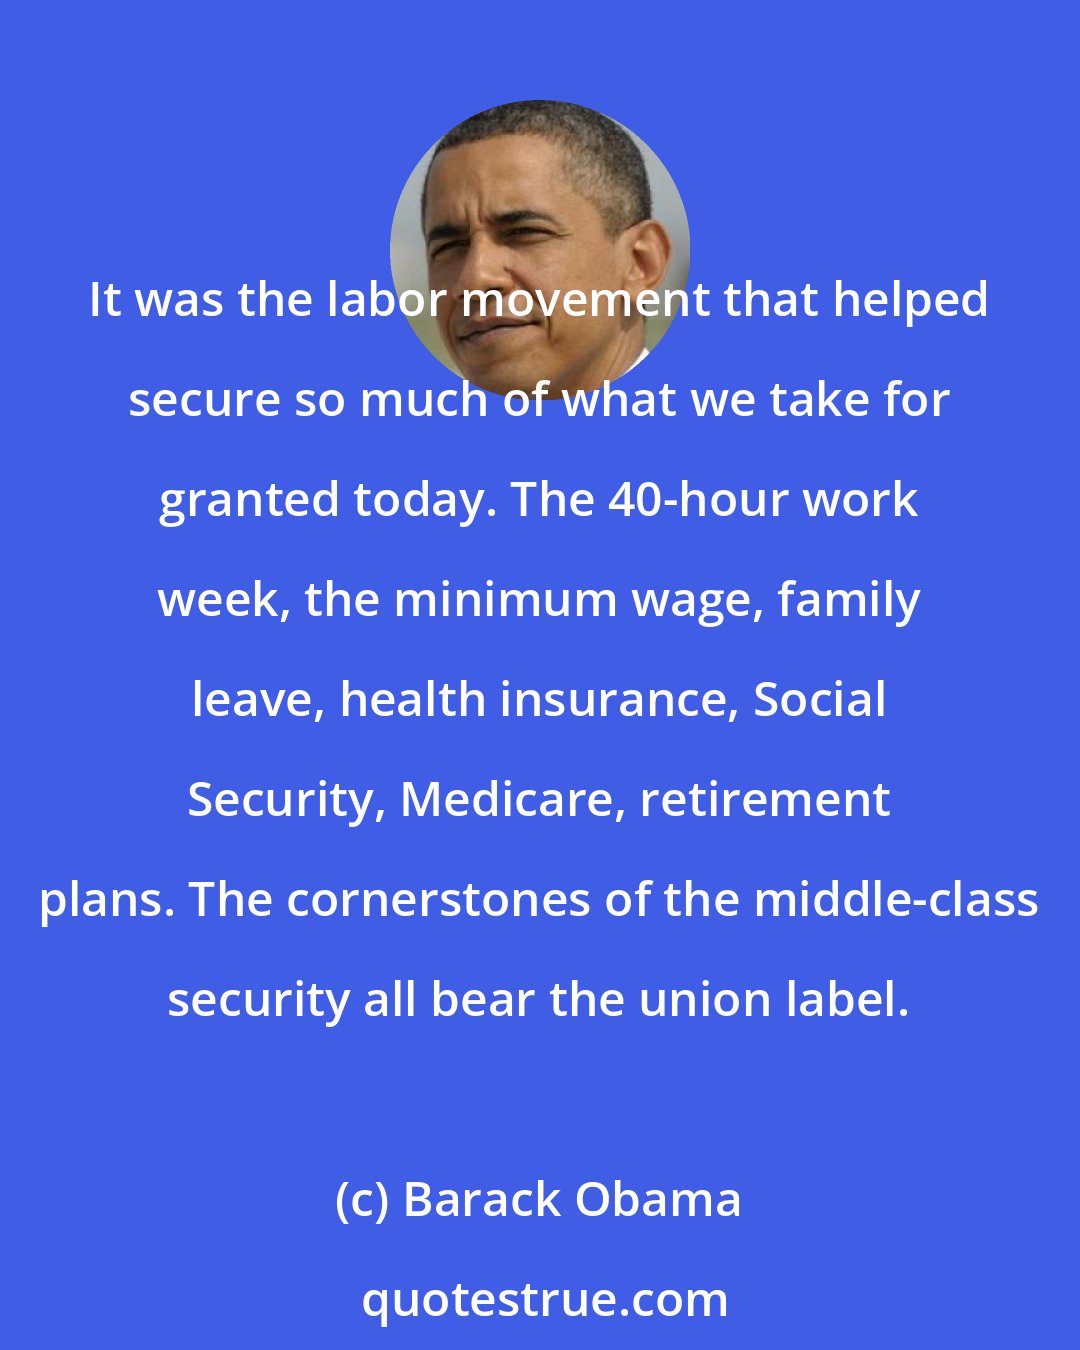 Barack Obama: It was the labor movement that helped secure so much of what we take for granted today. The 40-hour work week, the minimum wage, family leave, health insurance, Social Security, Medicare, retirement plans. The cornerstones of the middle-class security all bear the union label.